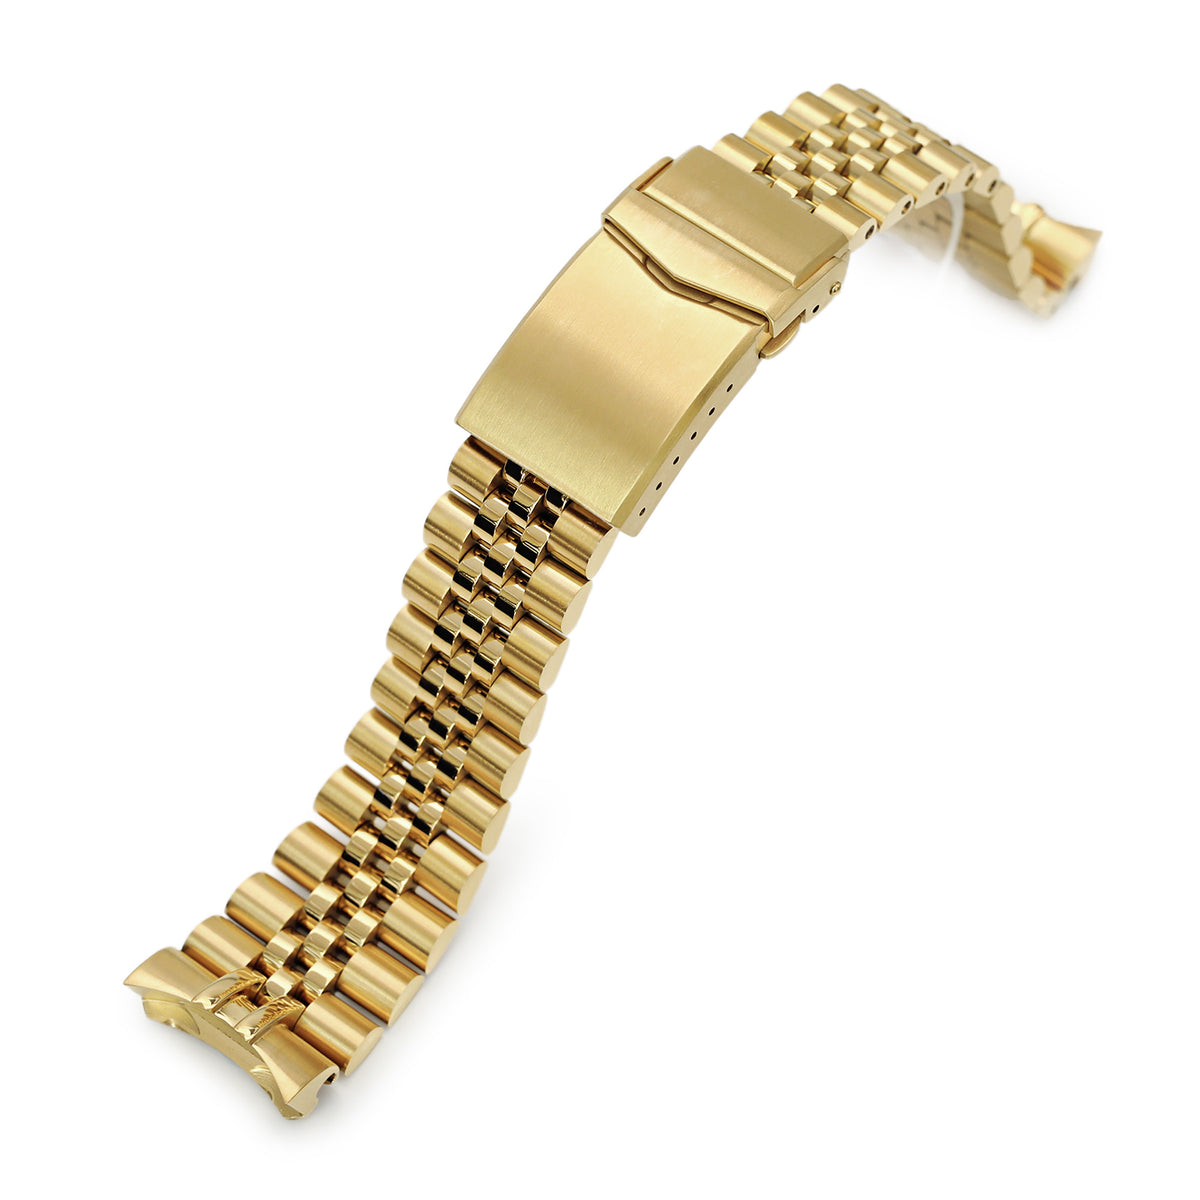 22mm Super-J Louis JUB Watch Band compatible with Seiko SKX007, 316L Stainless Steel Full IP Gold with Polished Center V-Clasp